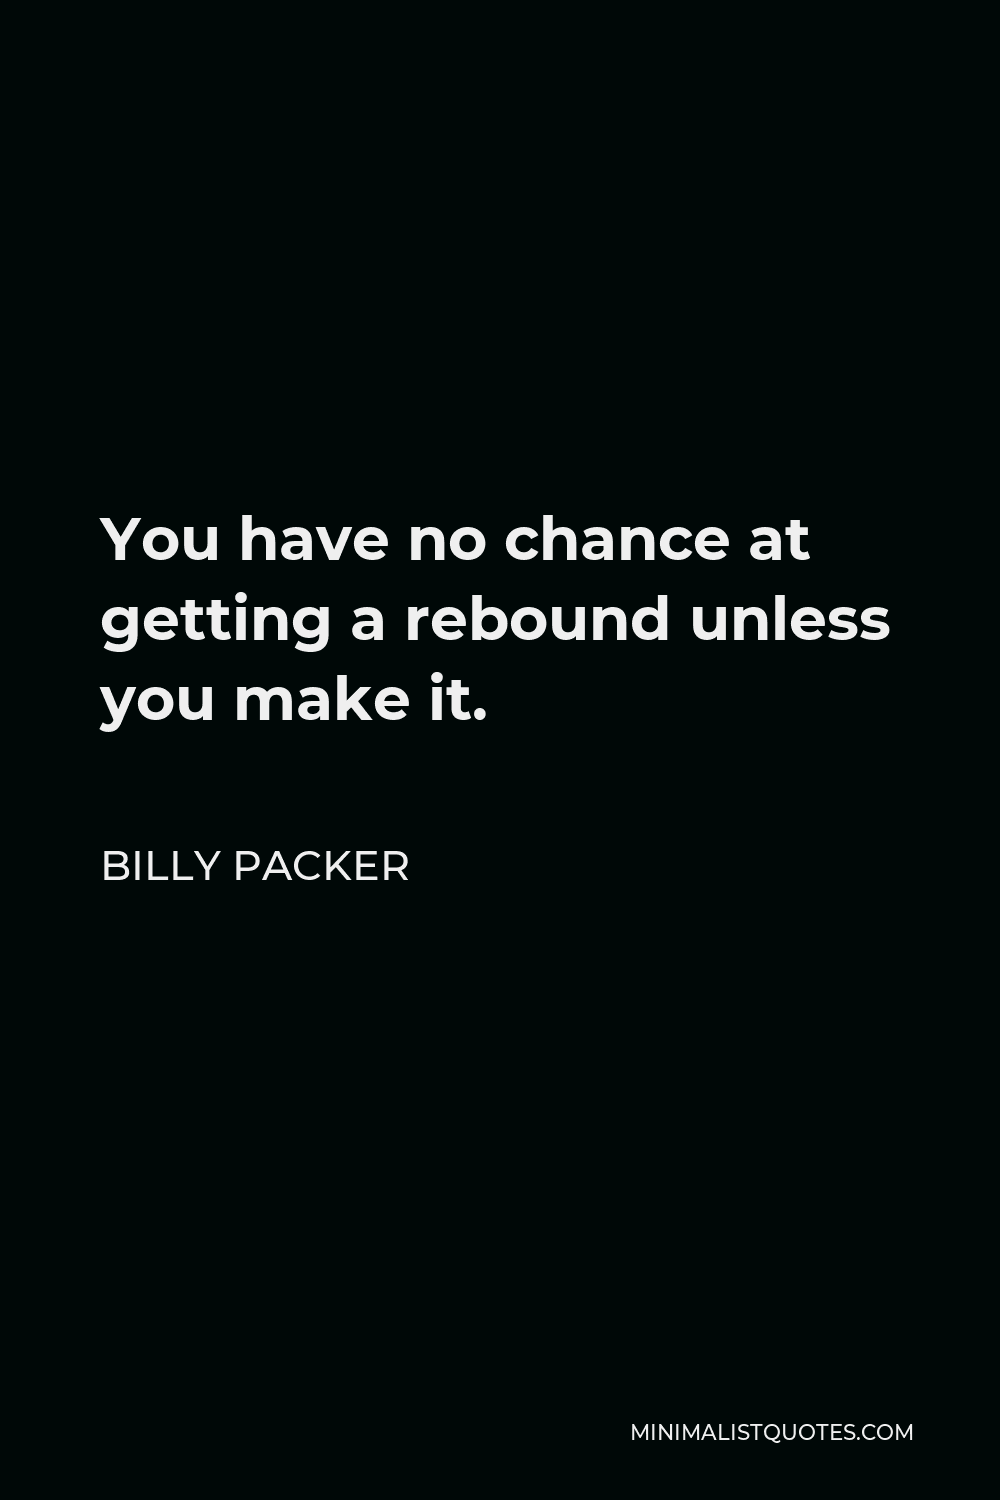 Billy Packer Quote - You have no chance at getting a rebound unless you make it.